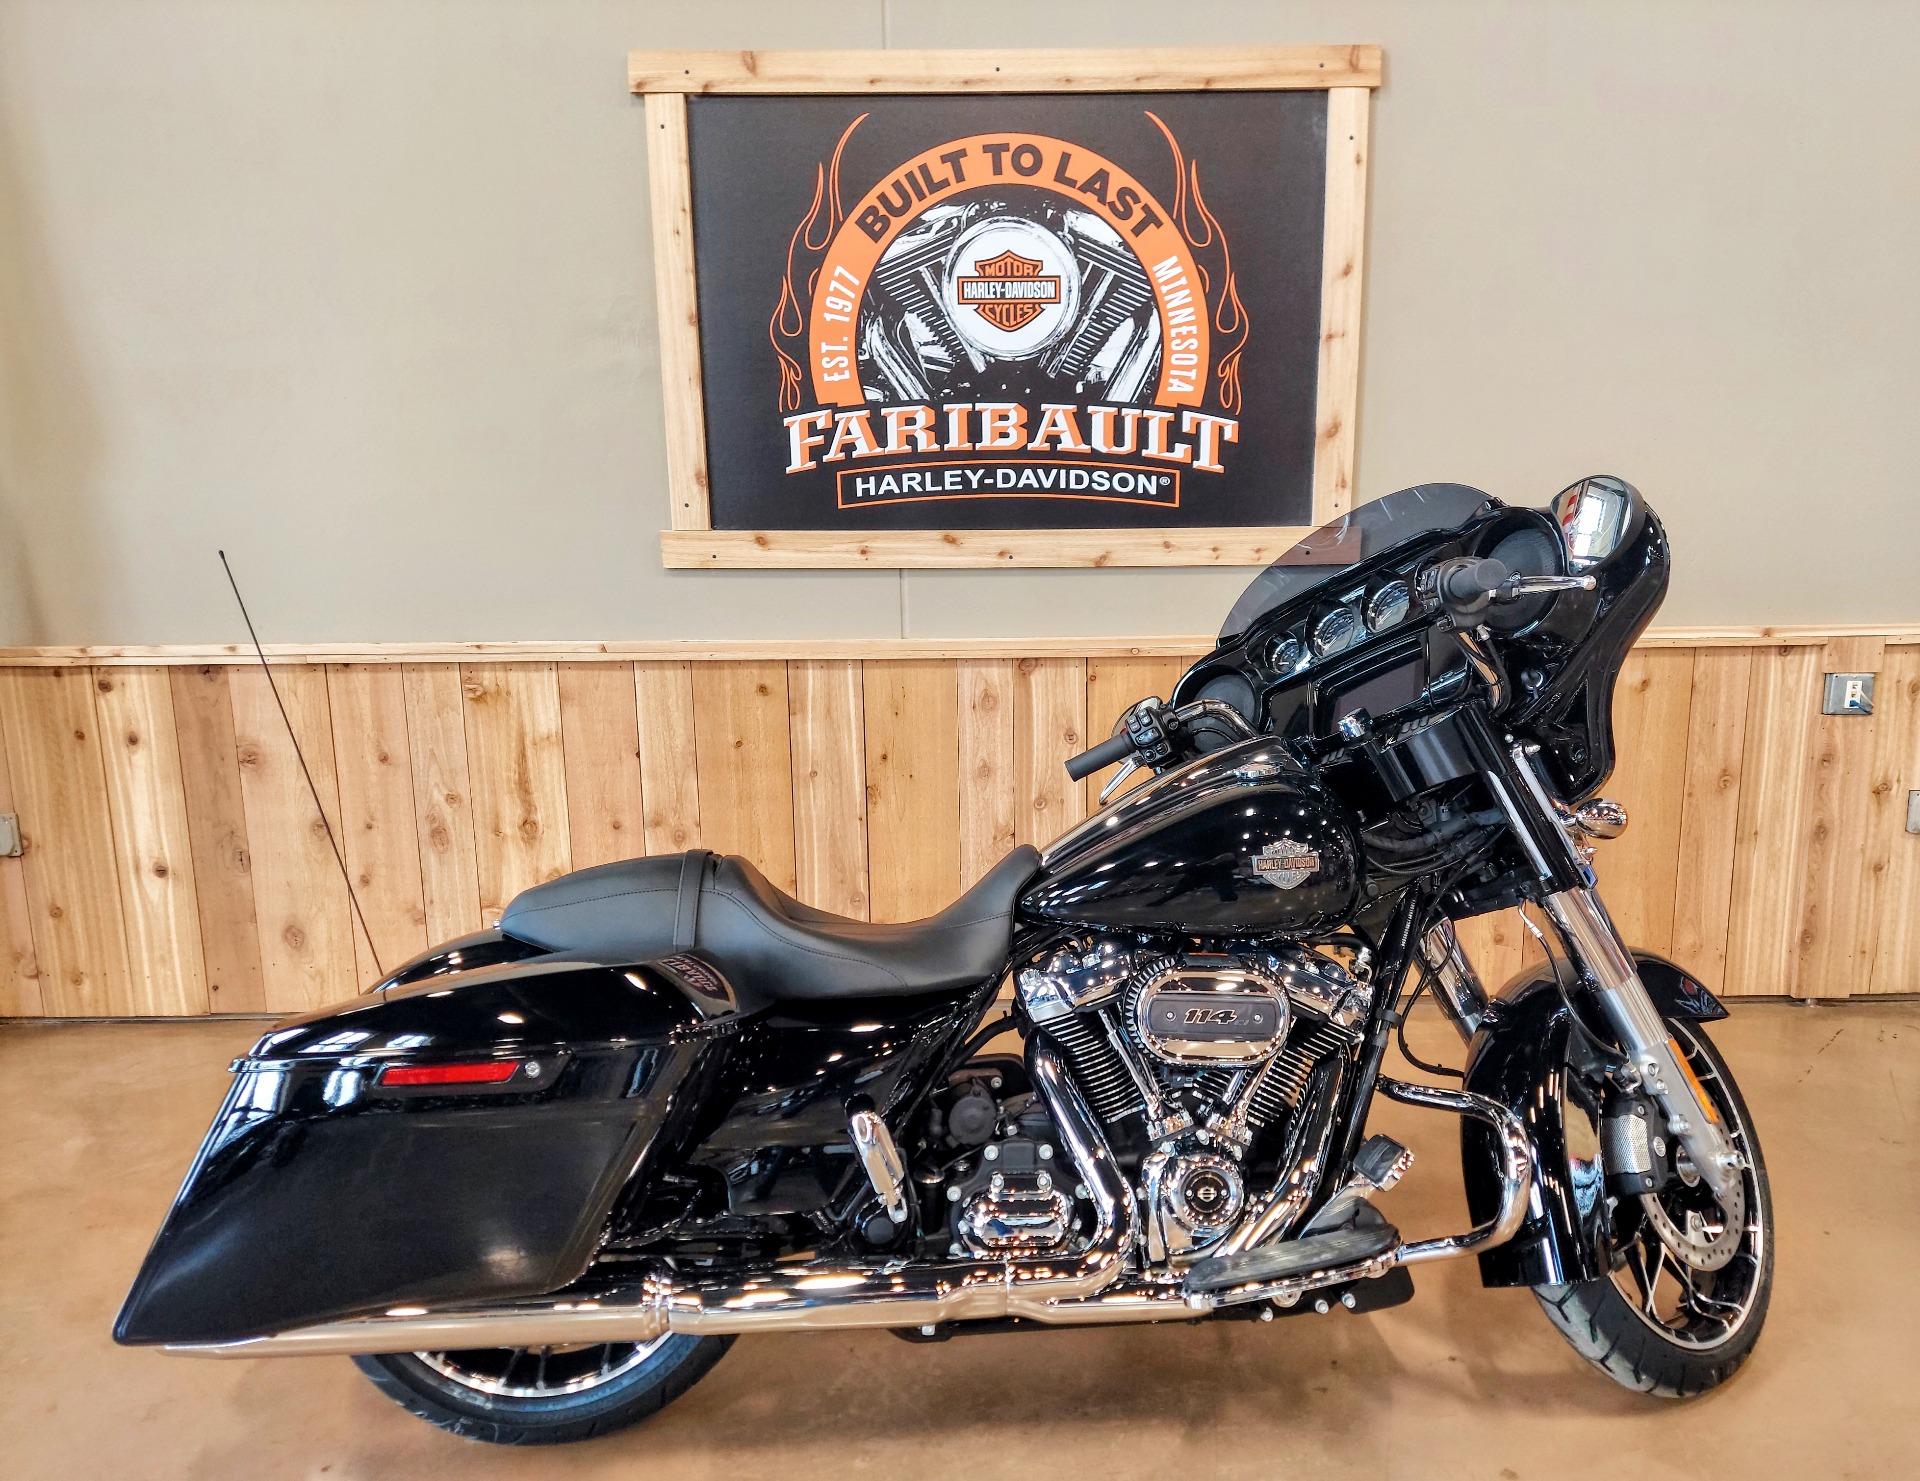 New 2021 Harley Davidson Street Glide Special Motorcycles In Faribault Mn To600585 Vivid Black Chrome Option